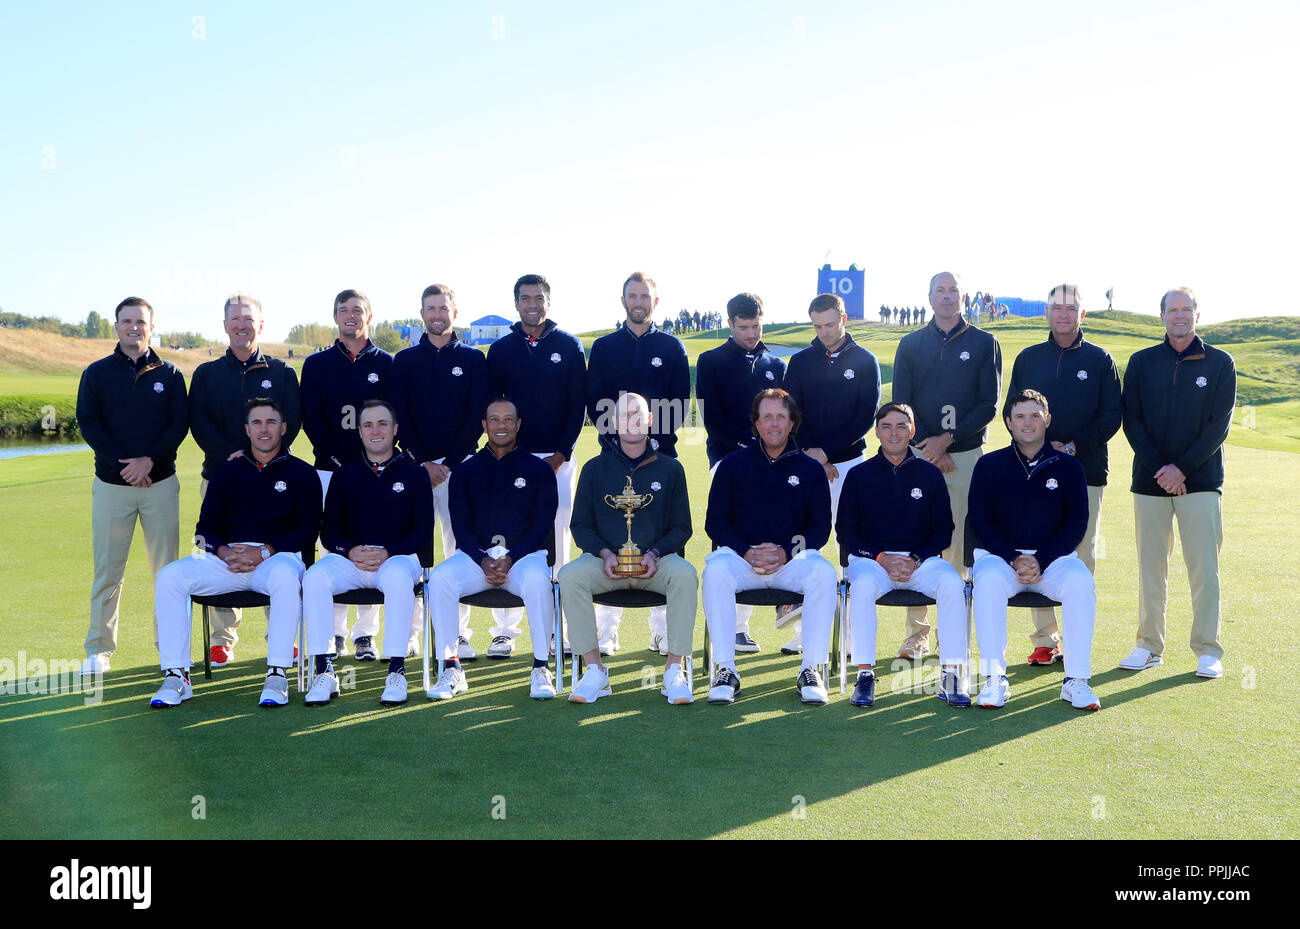 A Team USA group photo. Back Row (left-right): Zach Johnson, David Duval, Brooks Koepka, Bryson Dechambeau, Webb Simpson, Tony Finau, Dustin Johnson, Bubba Watson, Jordan Spieth, Patrick Reed, Matt Kuchar, David Love and Steve Stricker. Front Row (left-right): Justin Thomas, Tiger Woods, Jim Furyk, Phil Mickelson and Rickie Fowler during preview day three of the Ryder Cup at Le Golf National, Saint-Quentin-en-Yvelines, Paris. Stock Photo